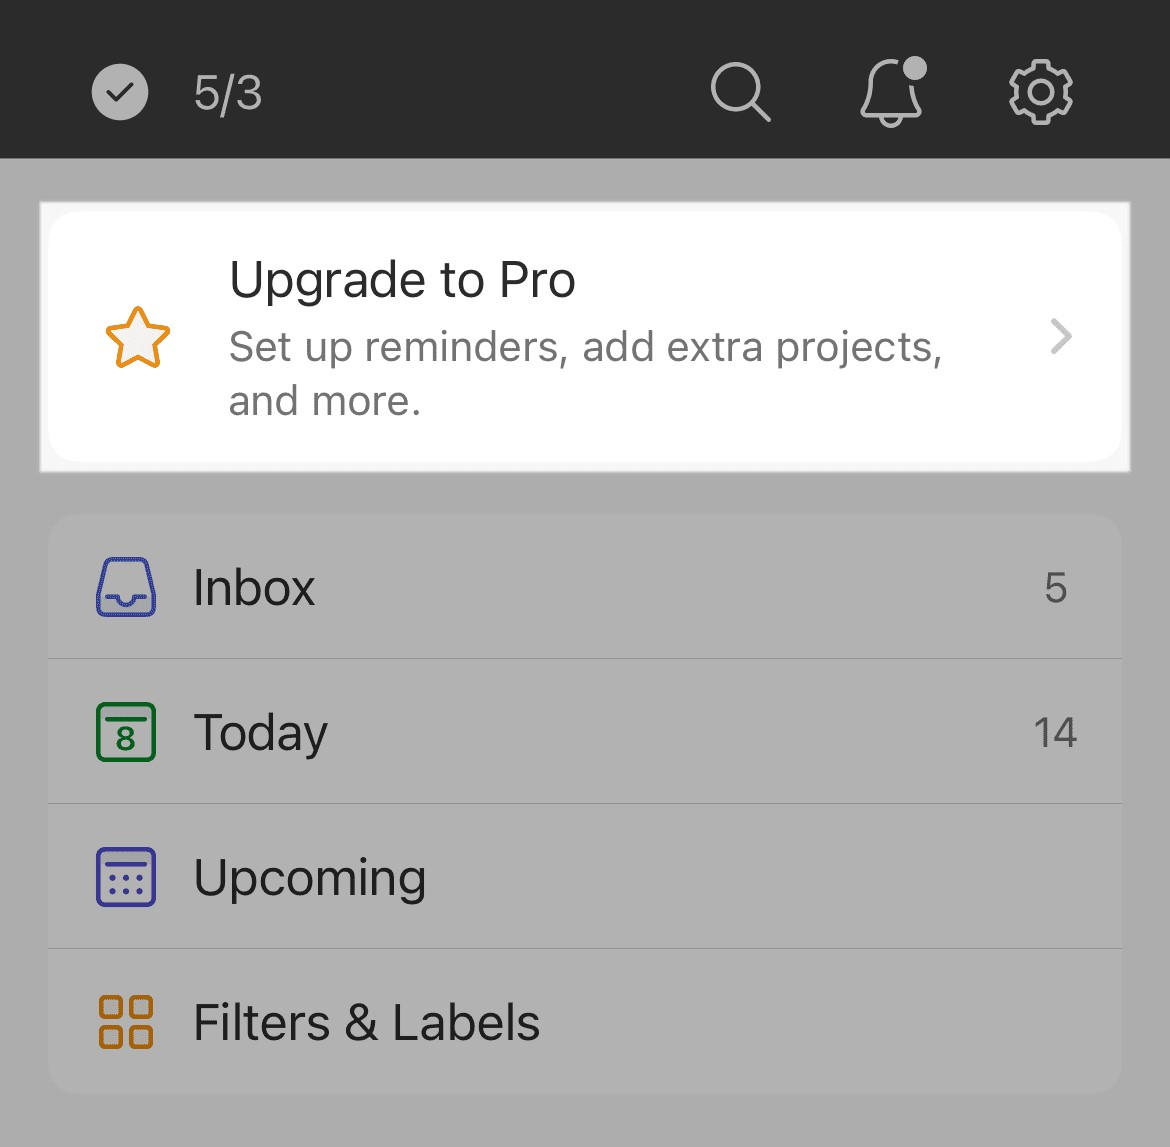 Native advertisement  successful  Todoist mobile app encouraging users to upgrade to a Todoist Pro plan